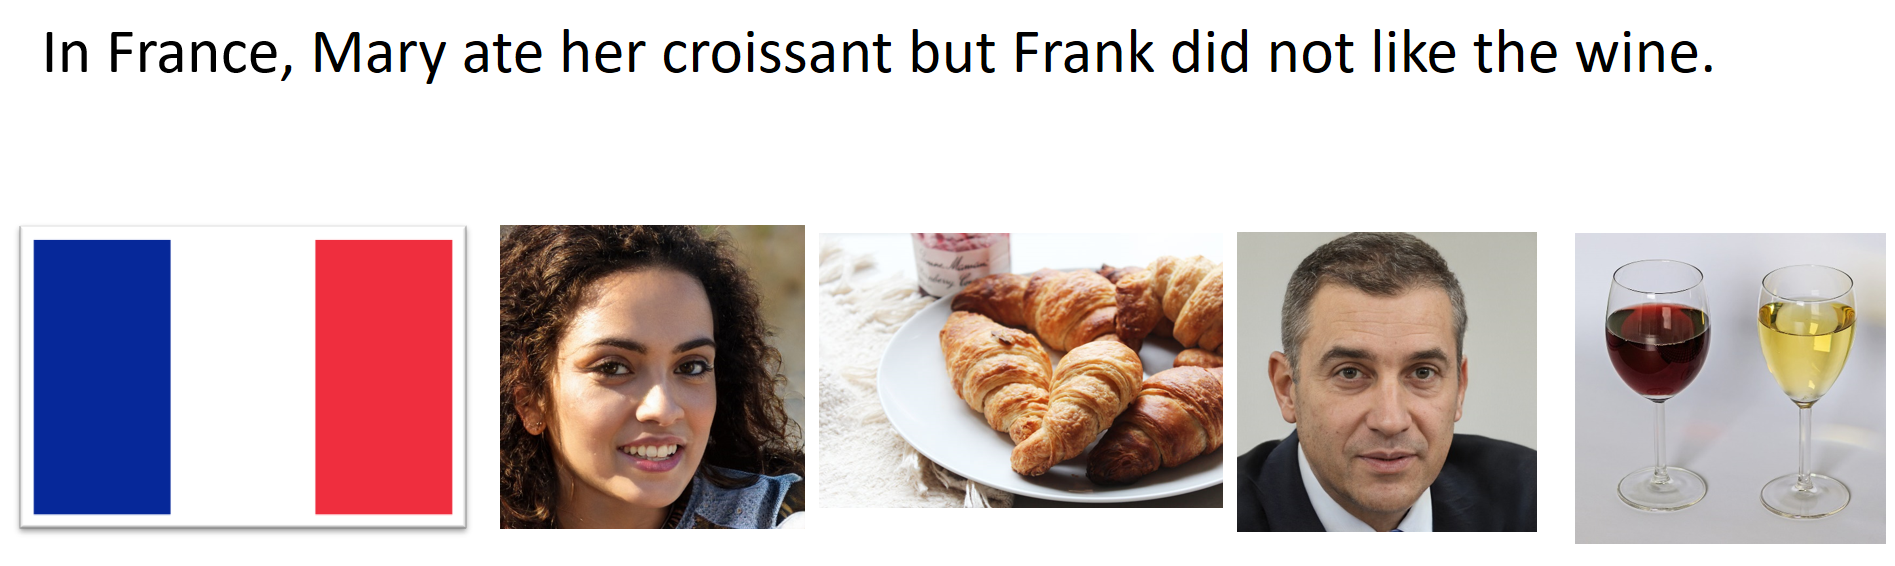 In France, Mary ate her croissant but Frank did not like the wine.